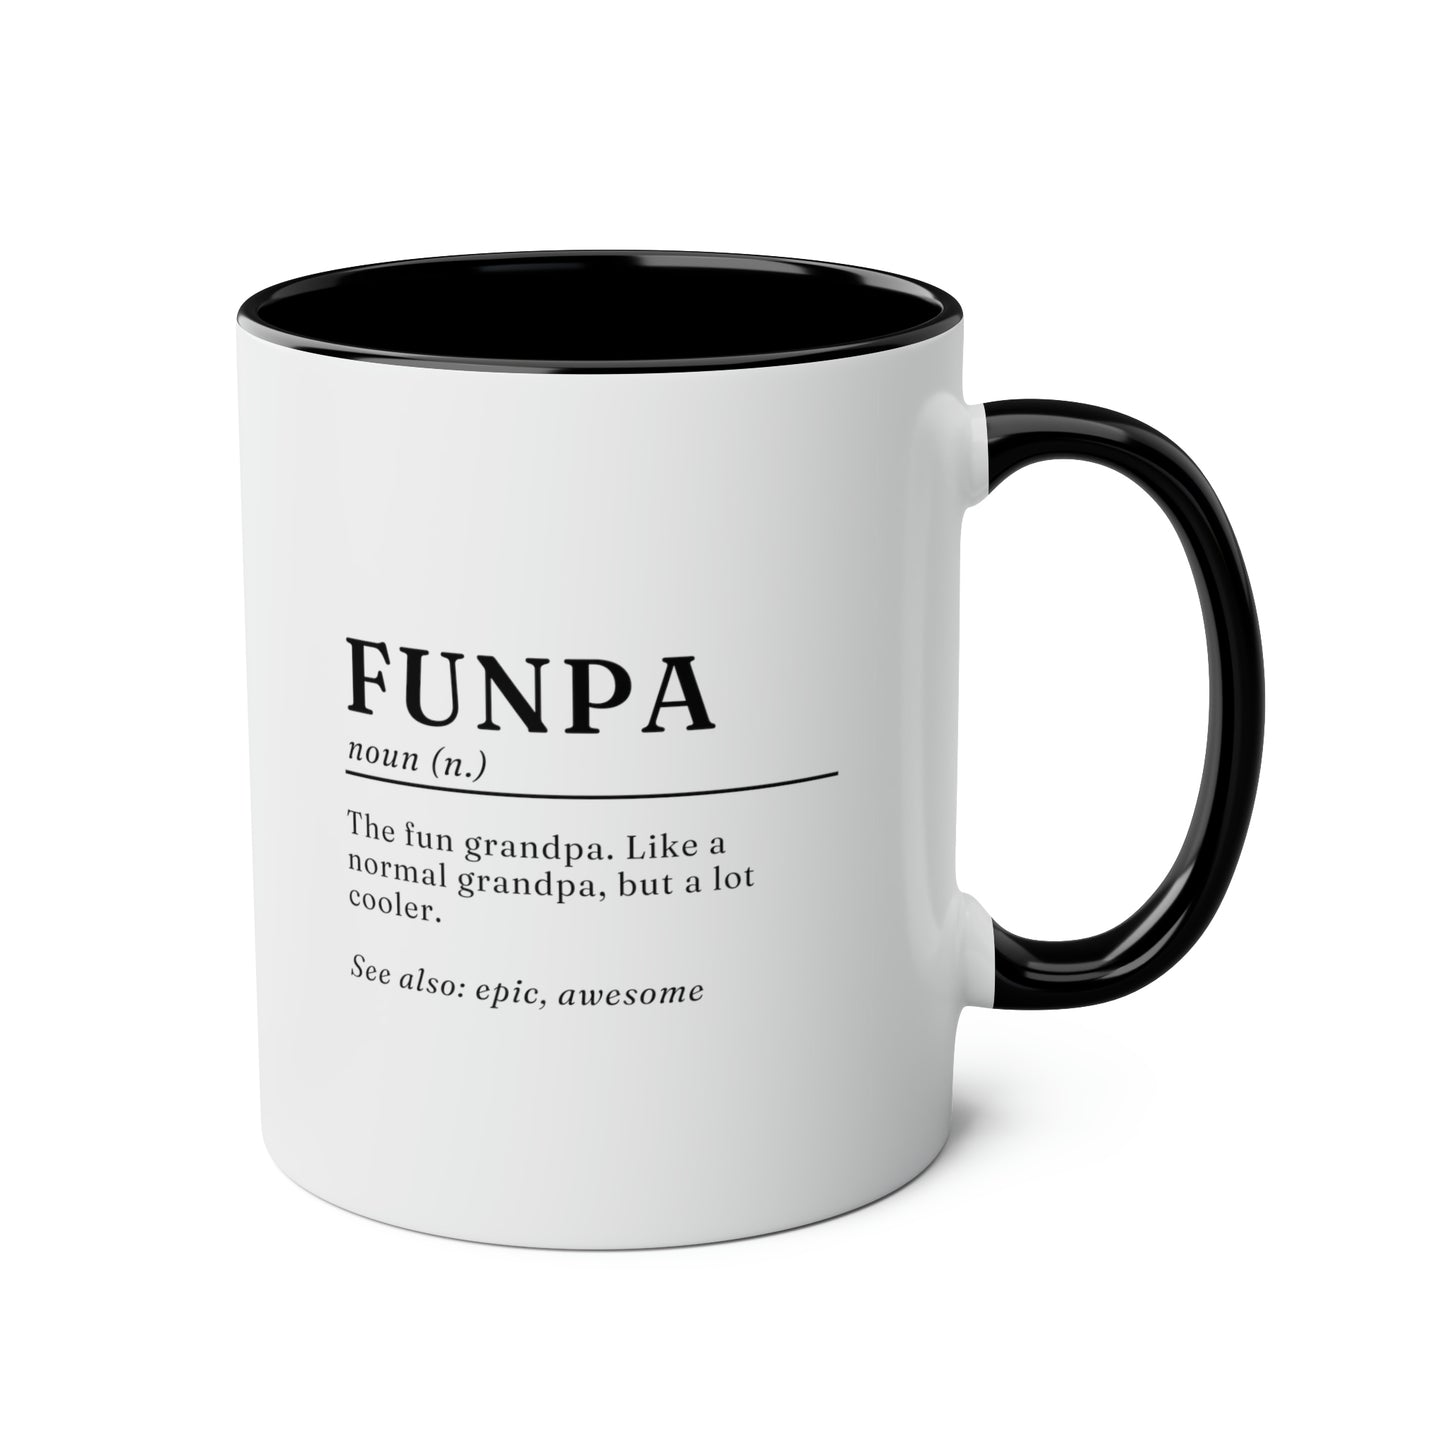 Funpa definition 11oz white with black accent funny large coffee mug gift for grandpa grandfather grandad pops custom pop personalized waveywares wavey wares wavywares wavy wares